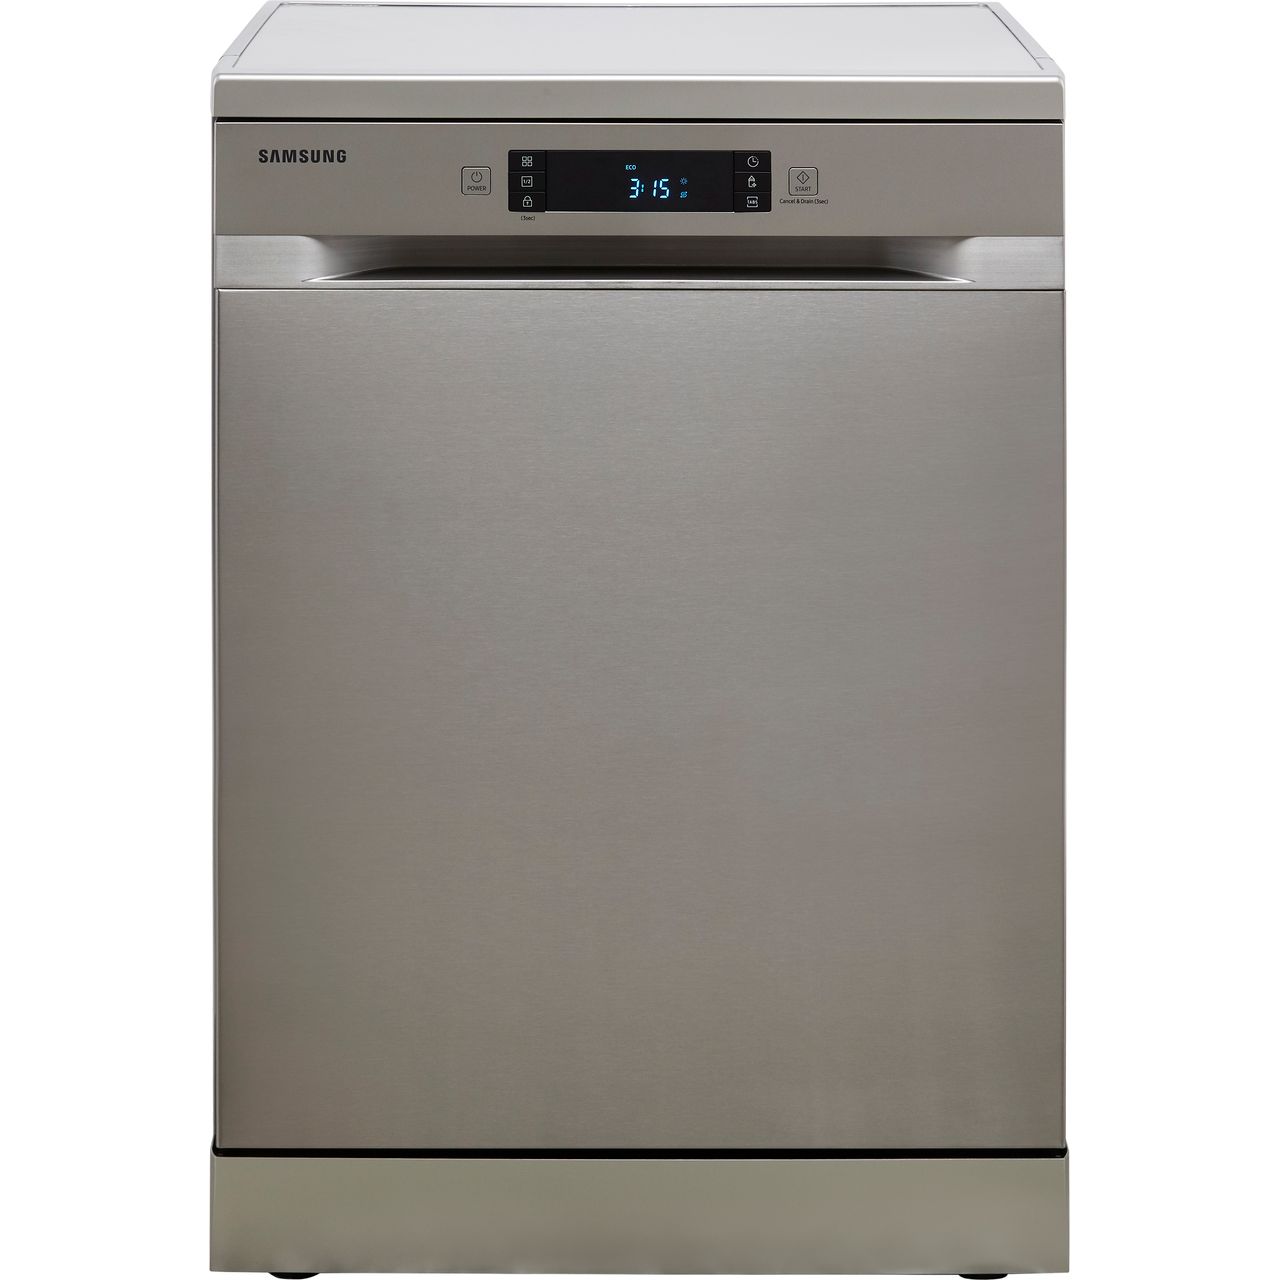 Samsung Series 5 Standard Dishwasher - Stainless Steel - F Rated